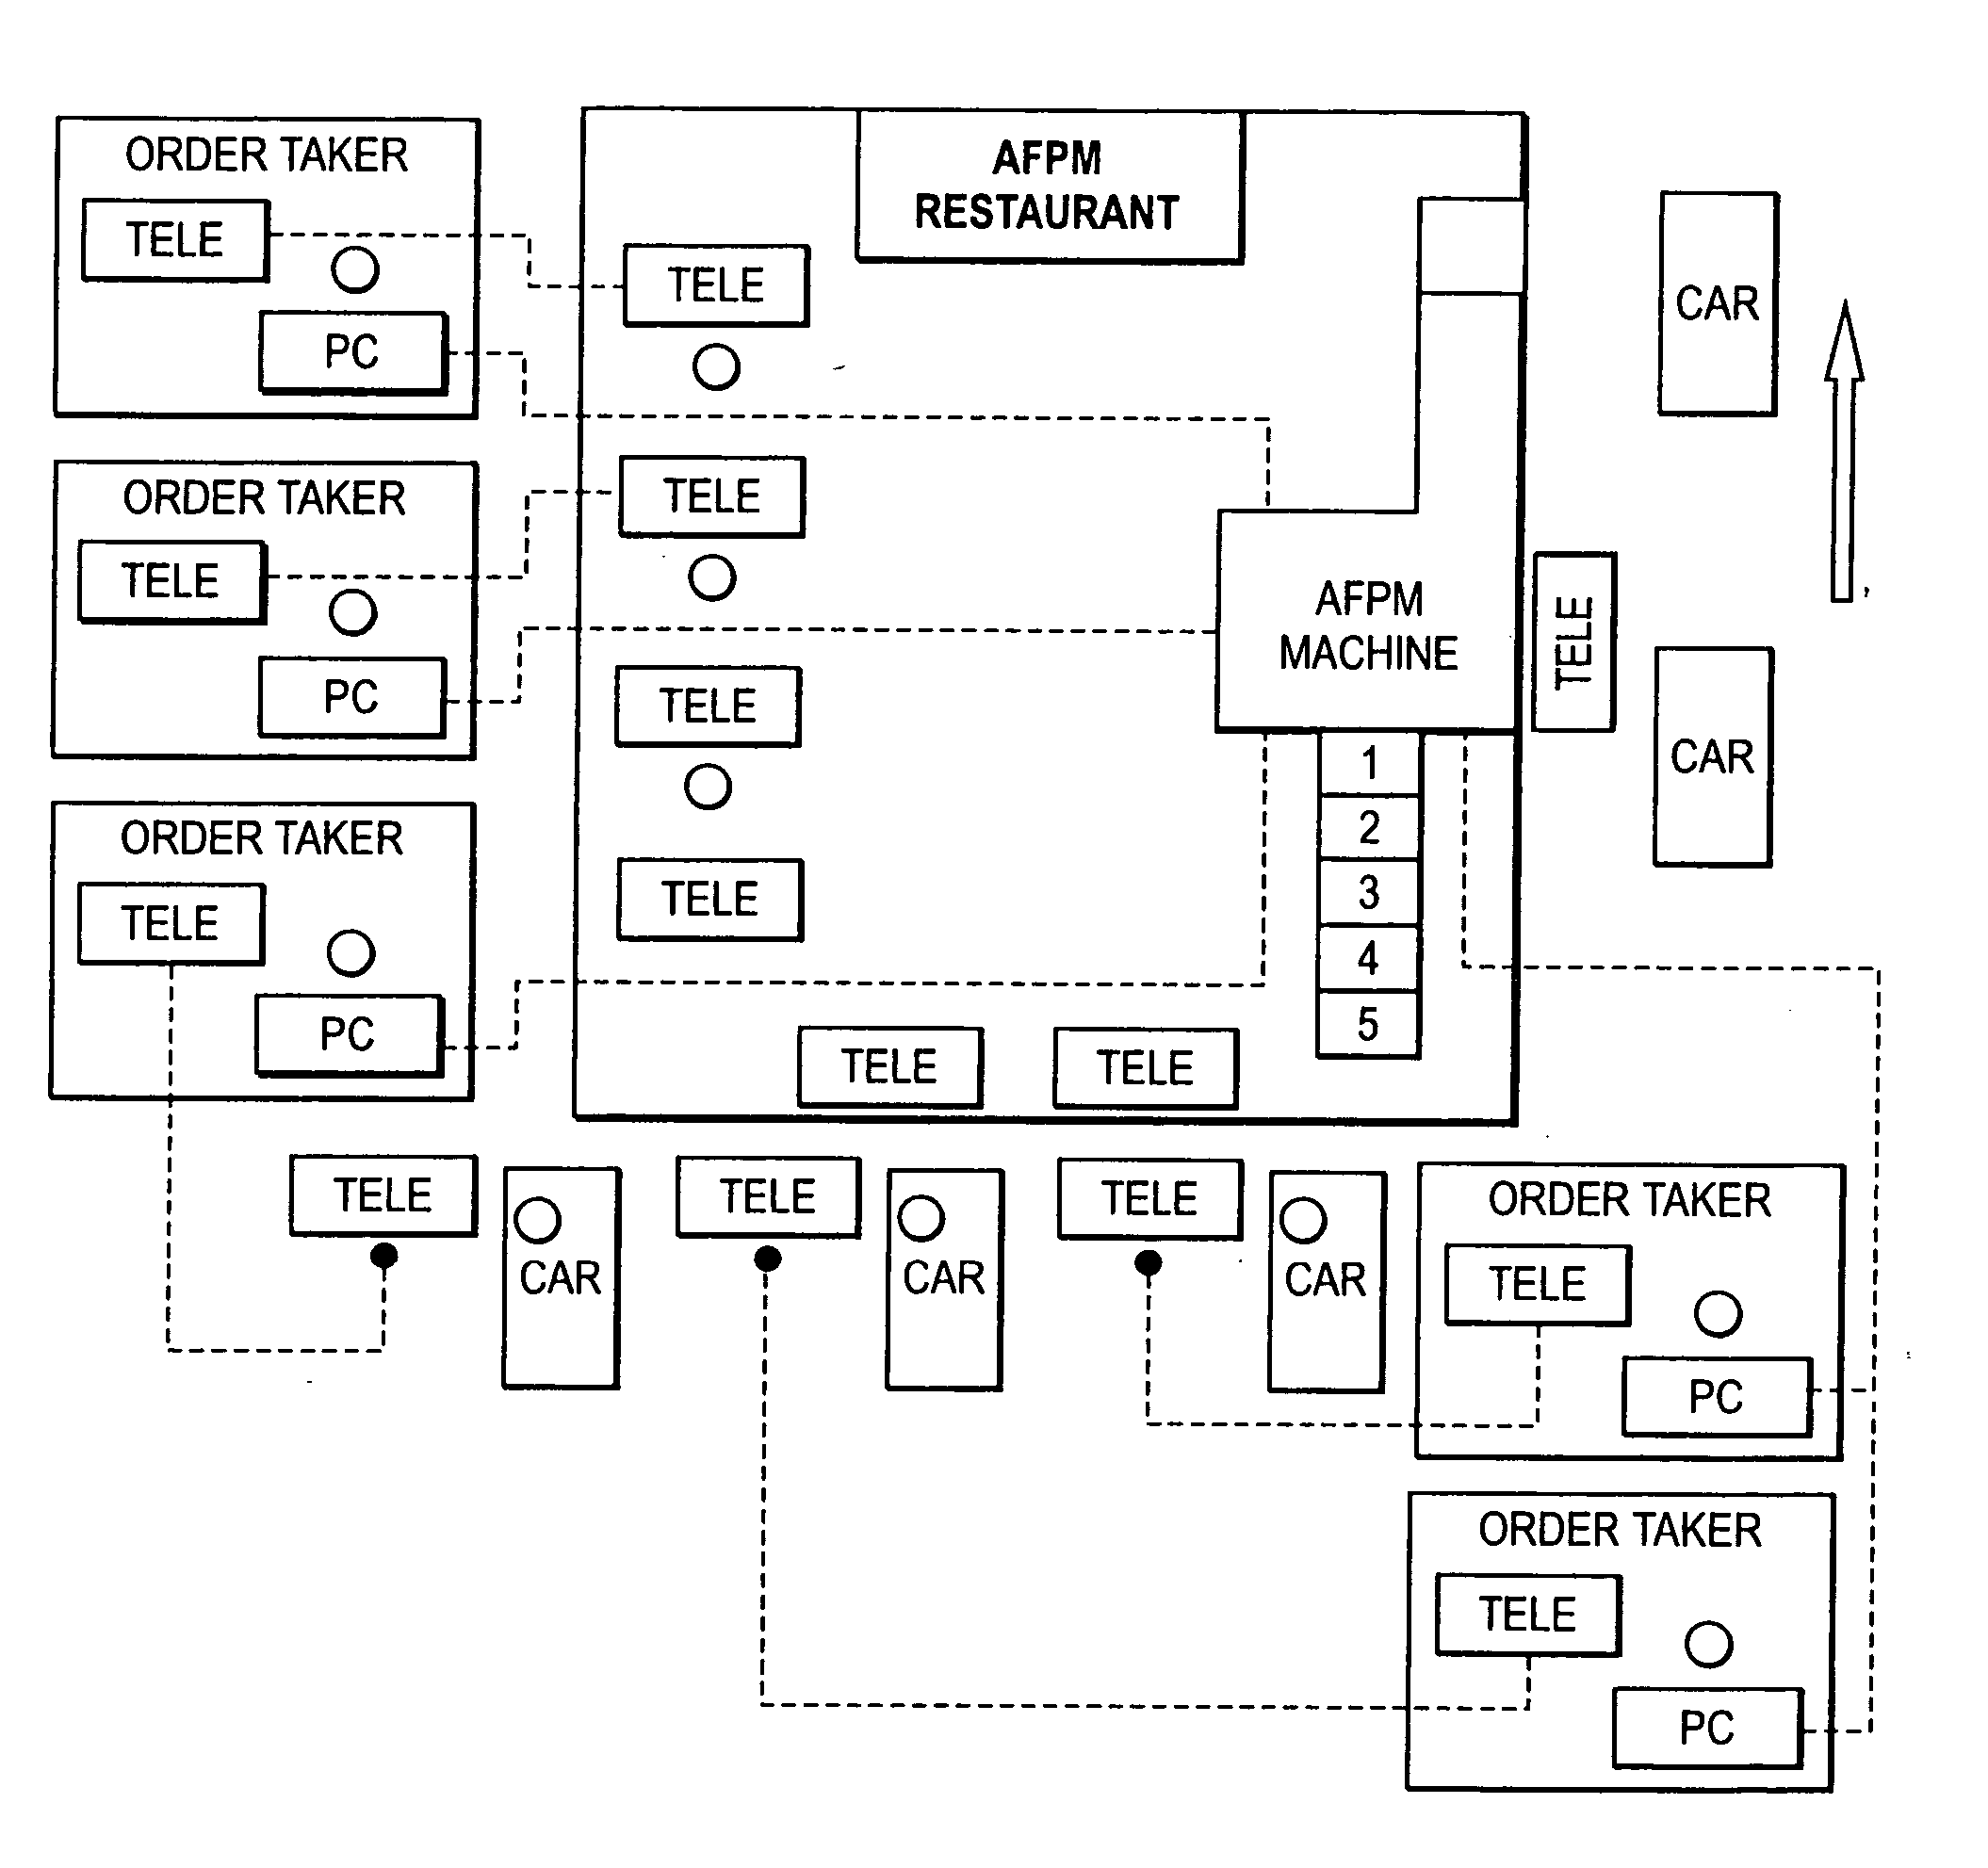 Systems and methods of ordering at an automated food processing machine